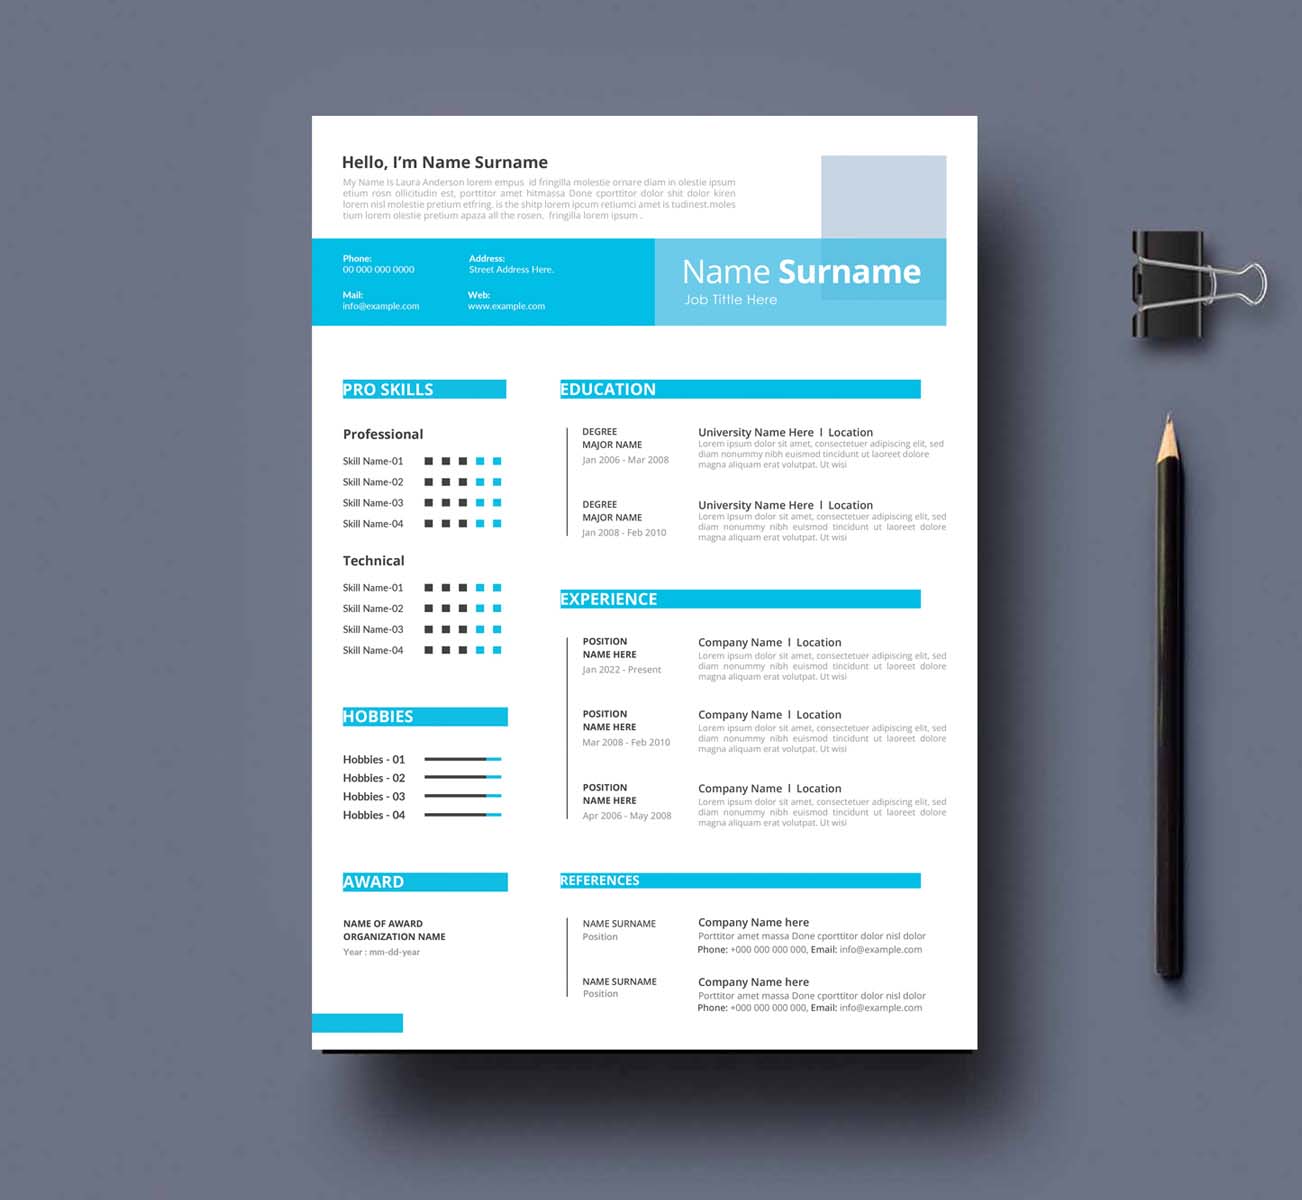 Blue and white resume template with a pencil next to it.